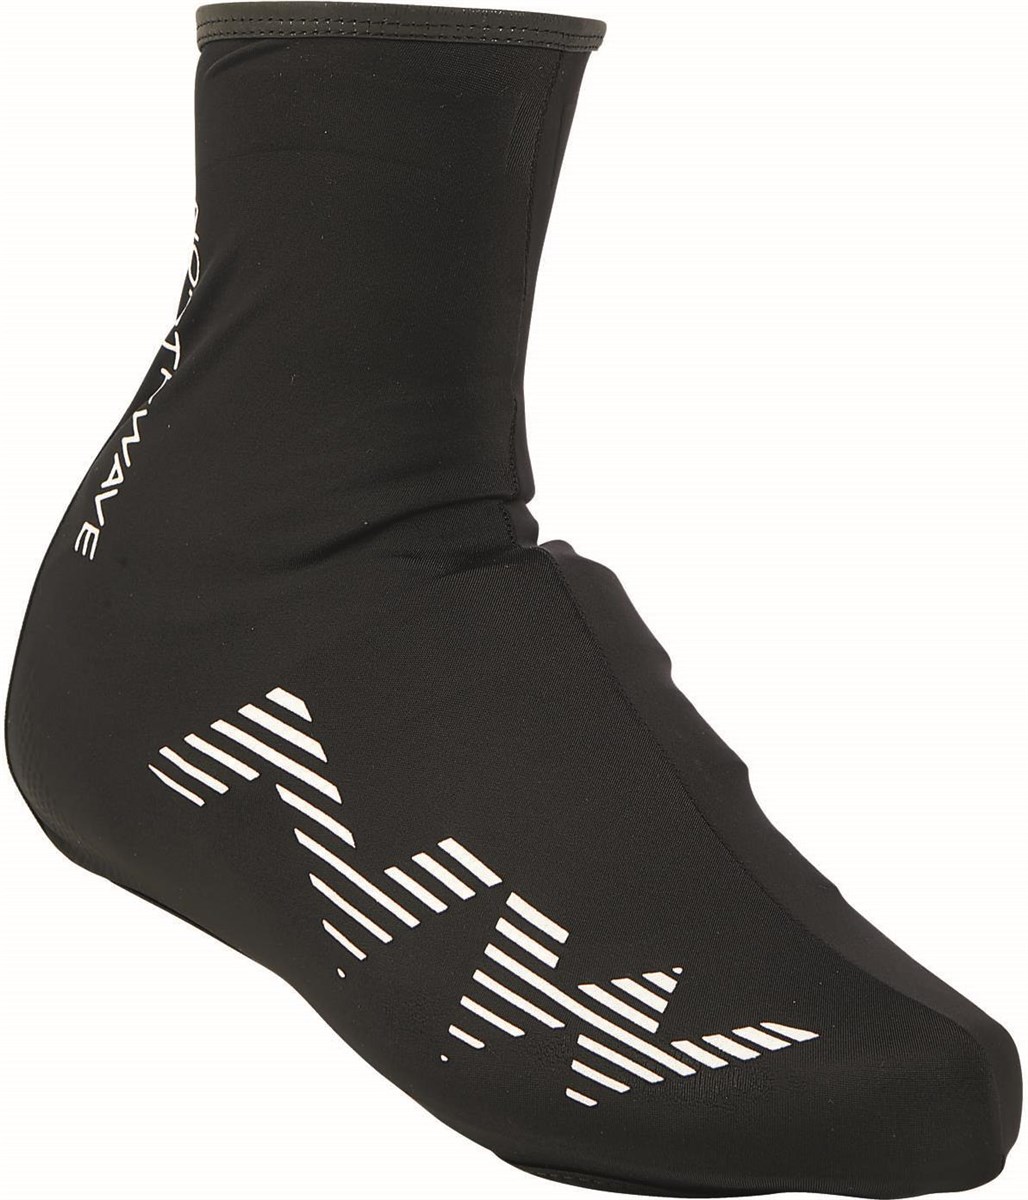 Northwave Evolution Shoe Covers product image